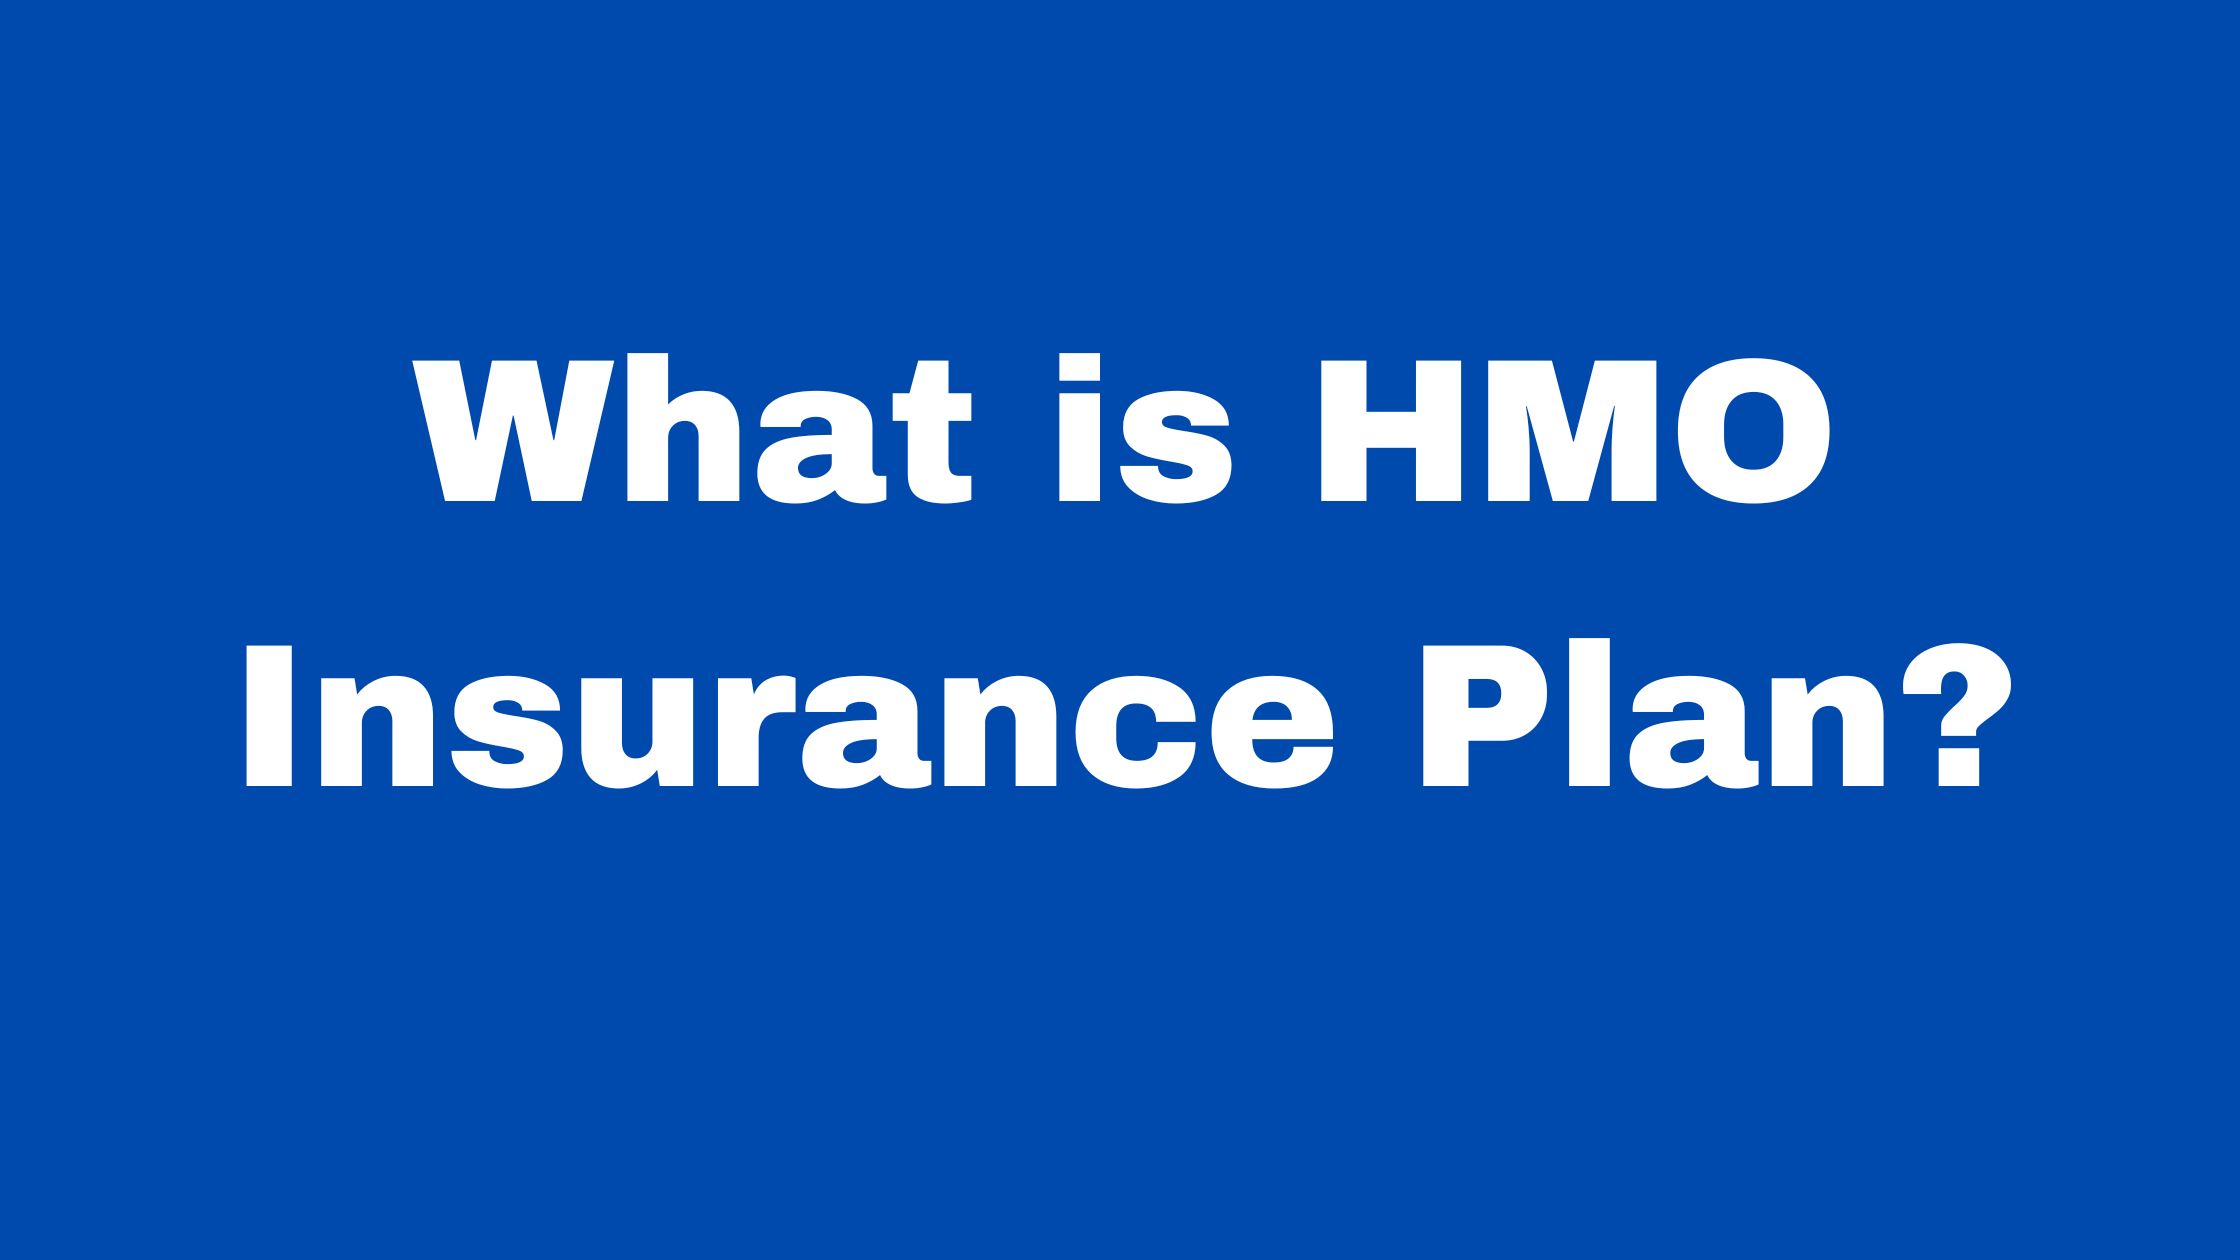 what is Hmo insuarnce plan in medical billing?